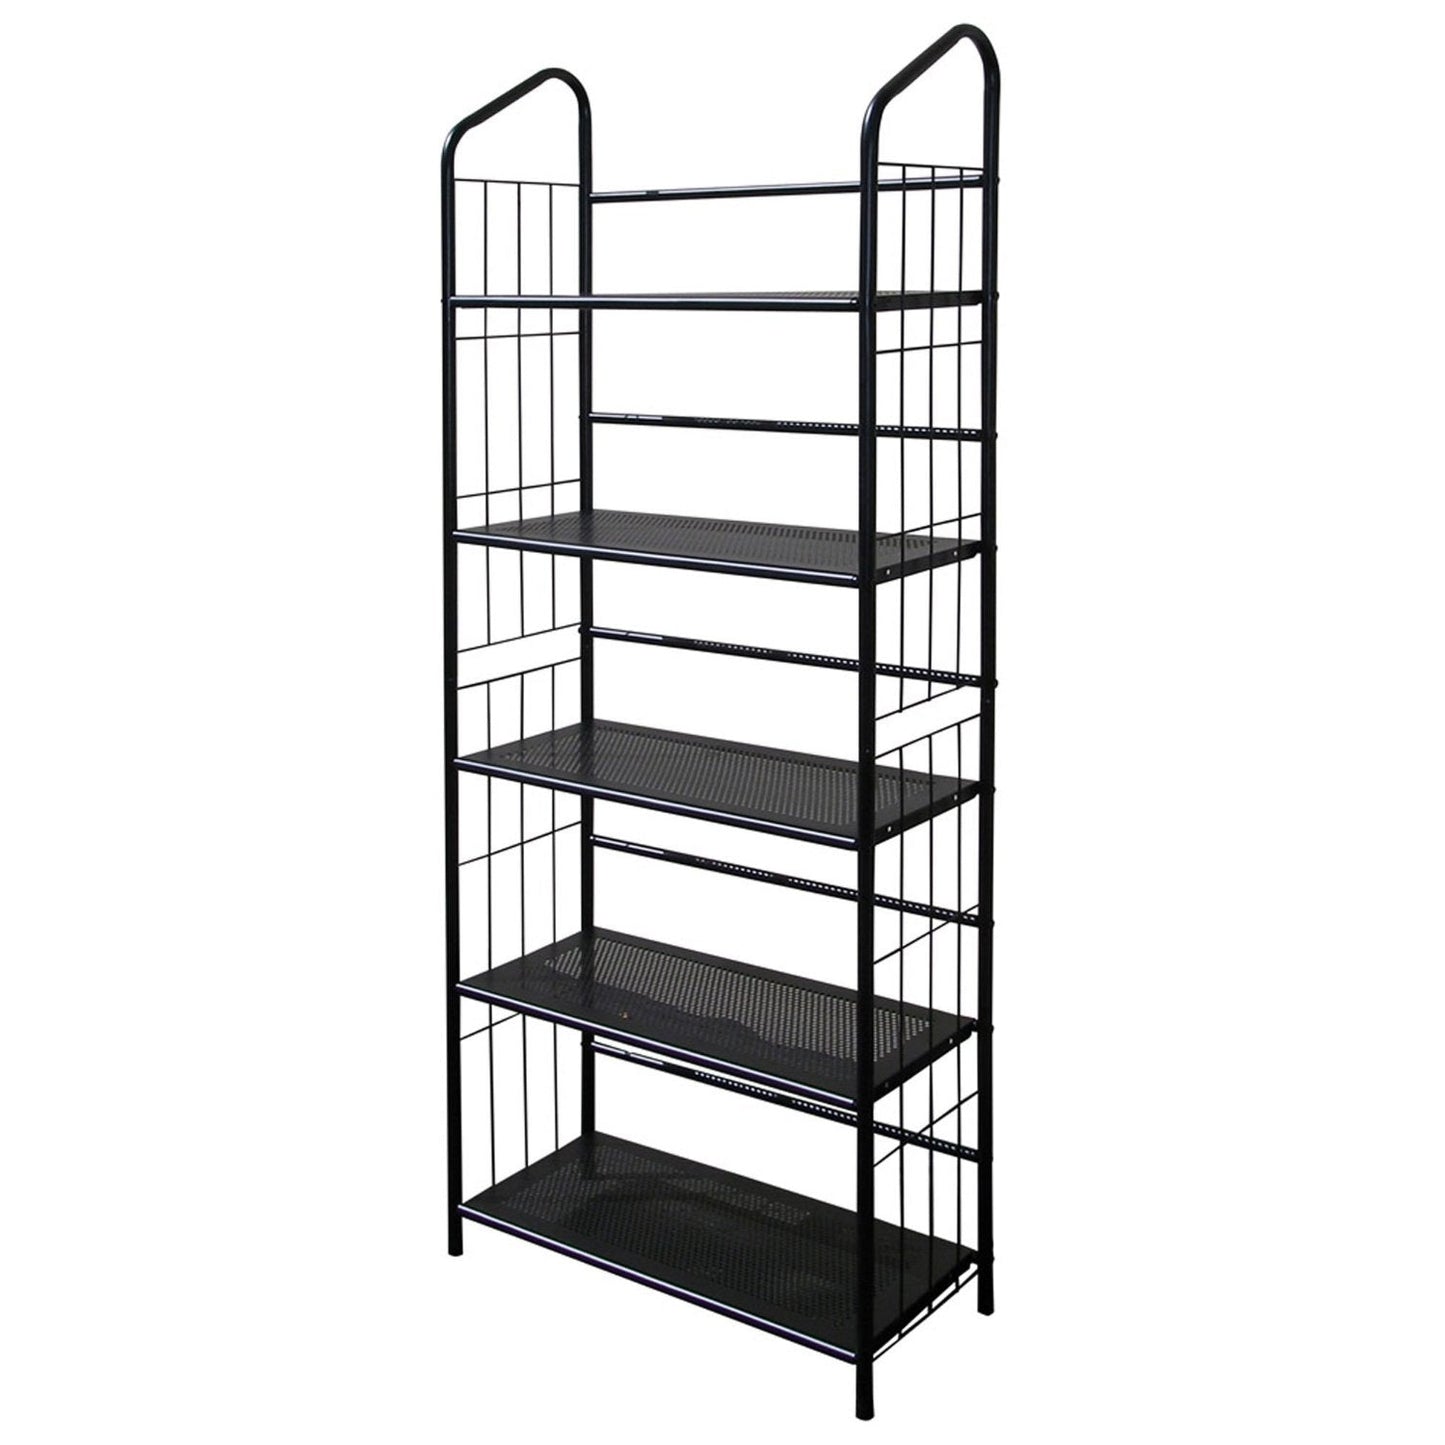 Accents > Shelving Units - 5-Tier Bookcase Storage Shelves Rack In Black Metal